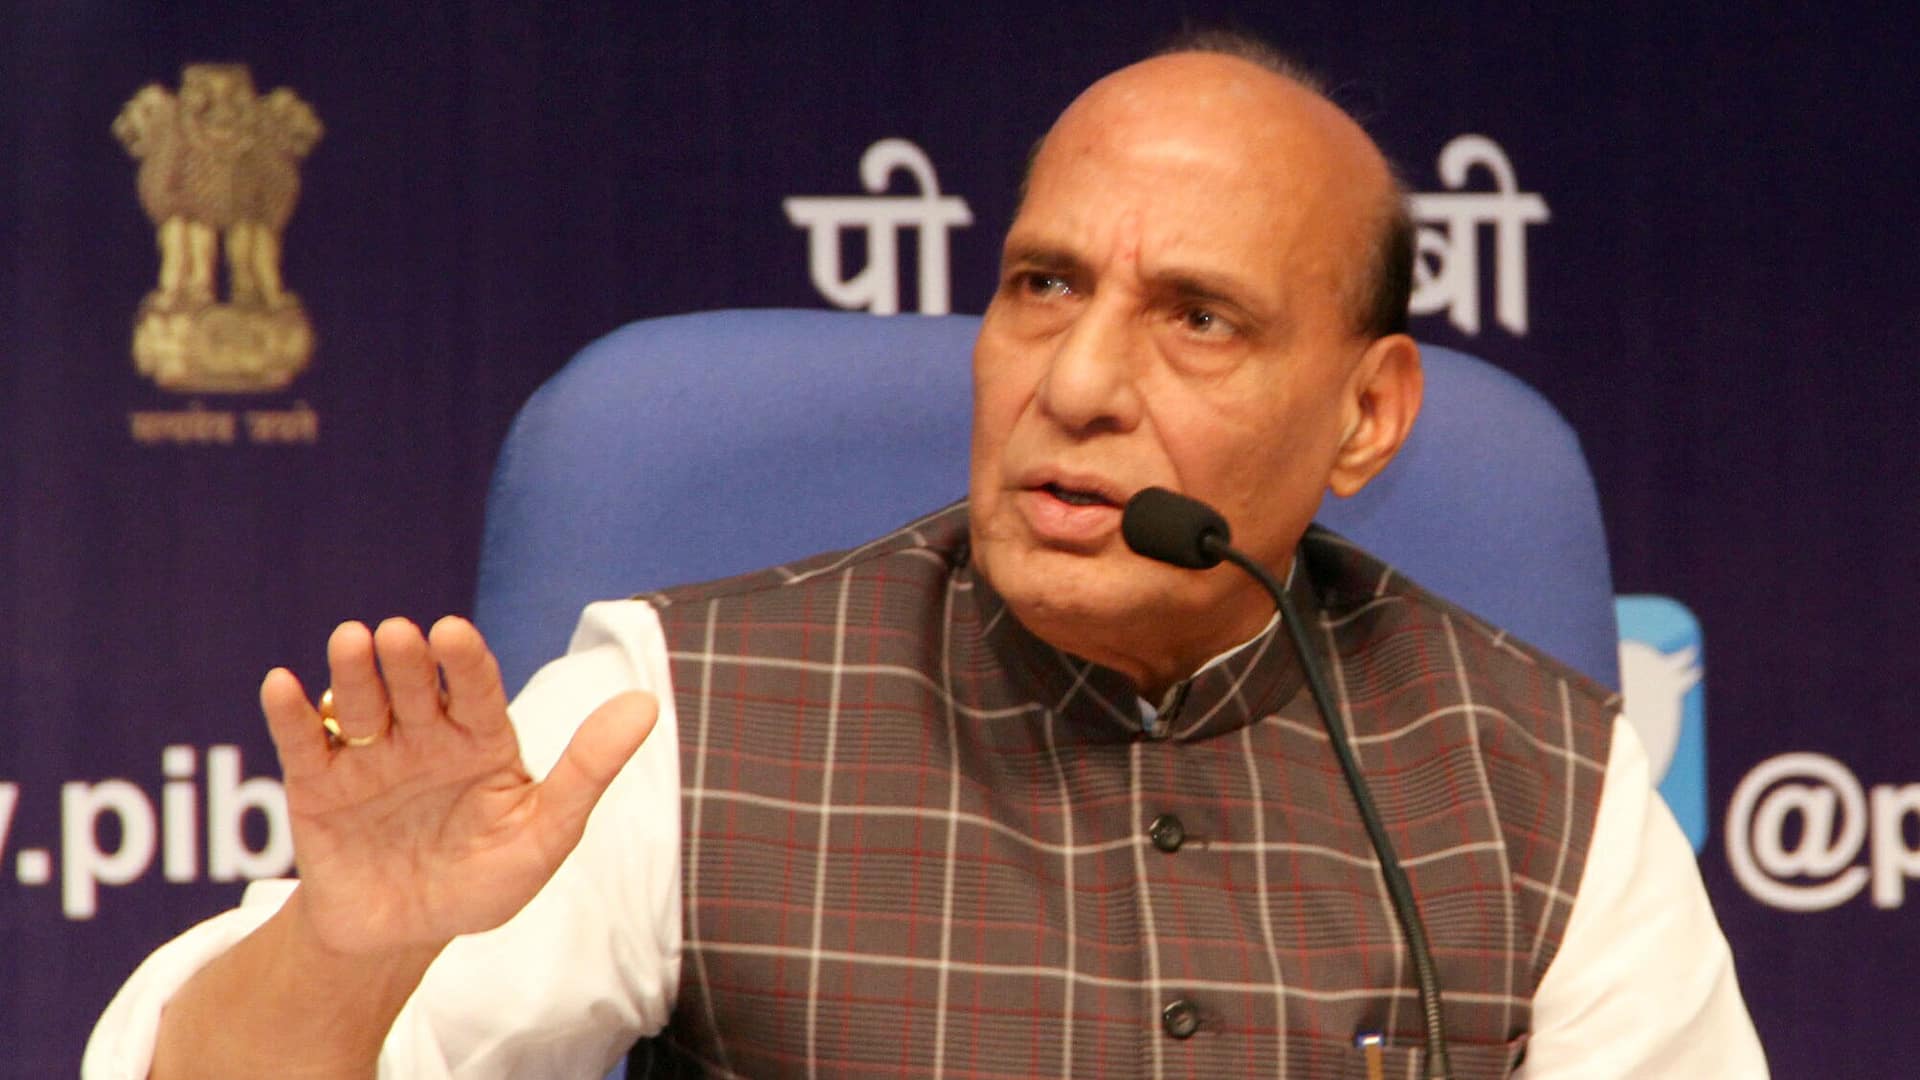 Budget proposals will help India achieve goal of becoming USD 5 trillion economy: Rajnath